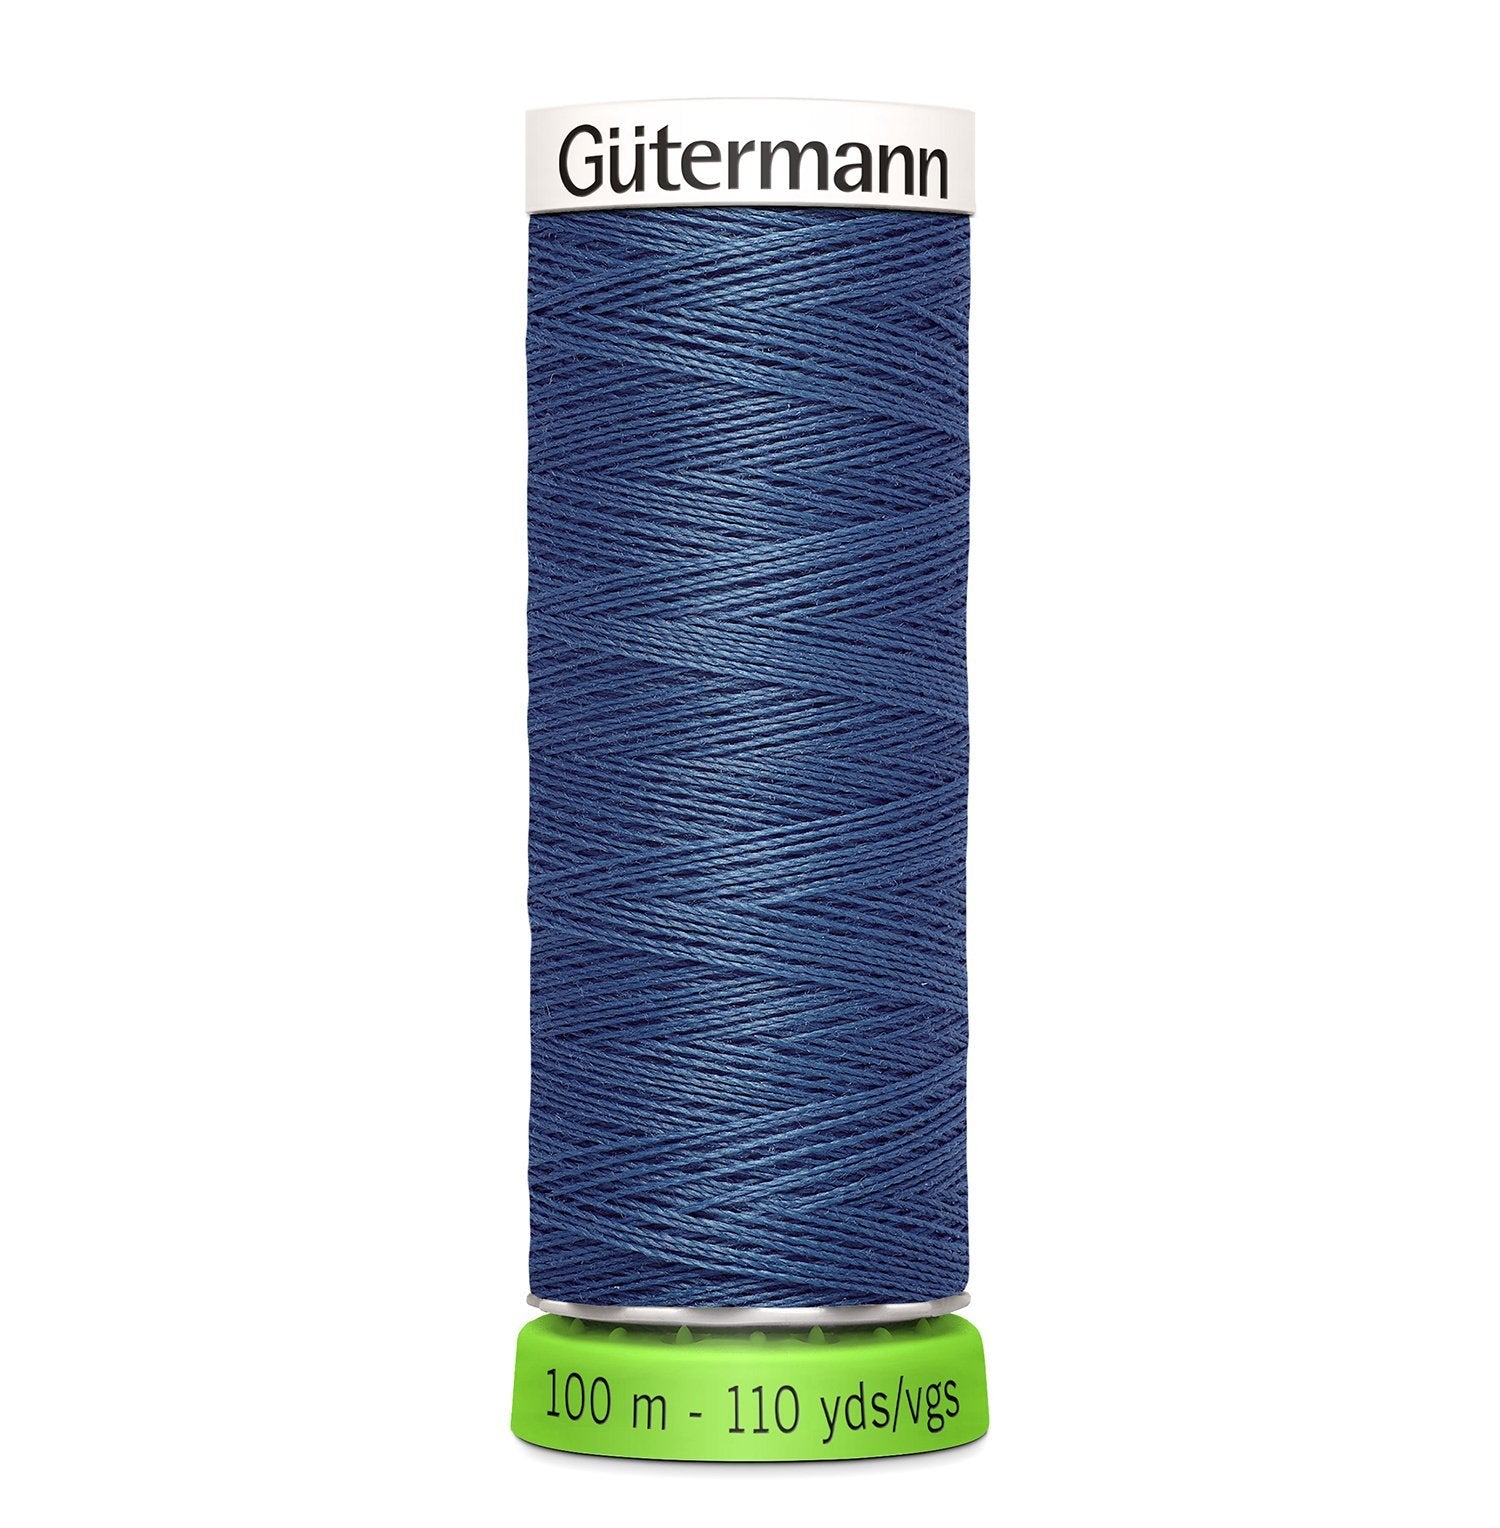 Gutermann Recycled Thread 100m, Colour 435 from Jaycotts Sewing Supplies